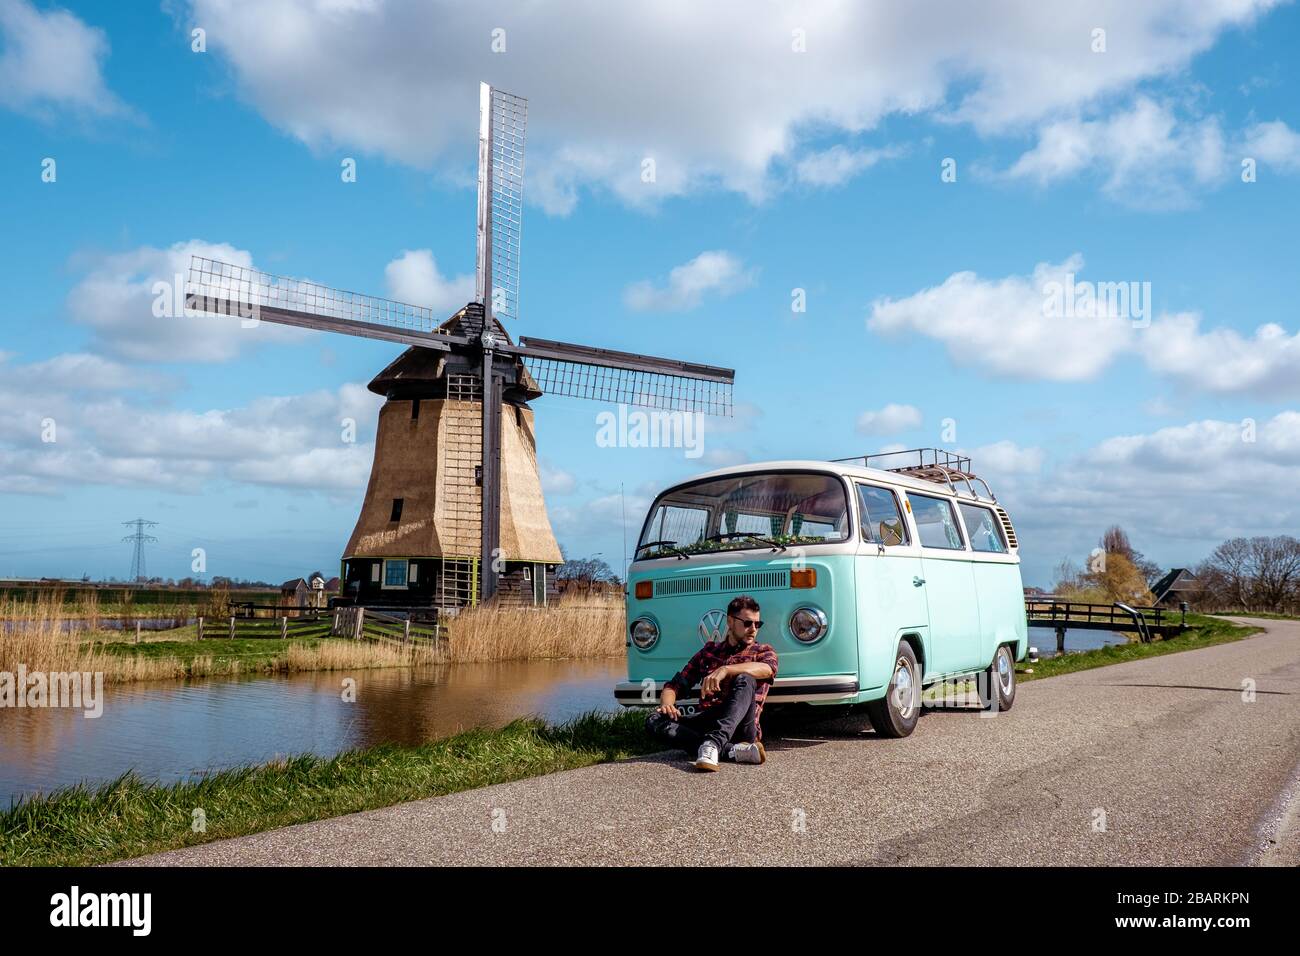 Alkmaar Netherlands April 2019, classic old vintage car van parked by historical windmill in Holland, Classic Minty Green and white VW Camper Van Stock Photo